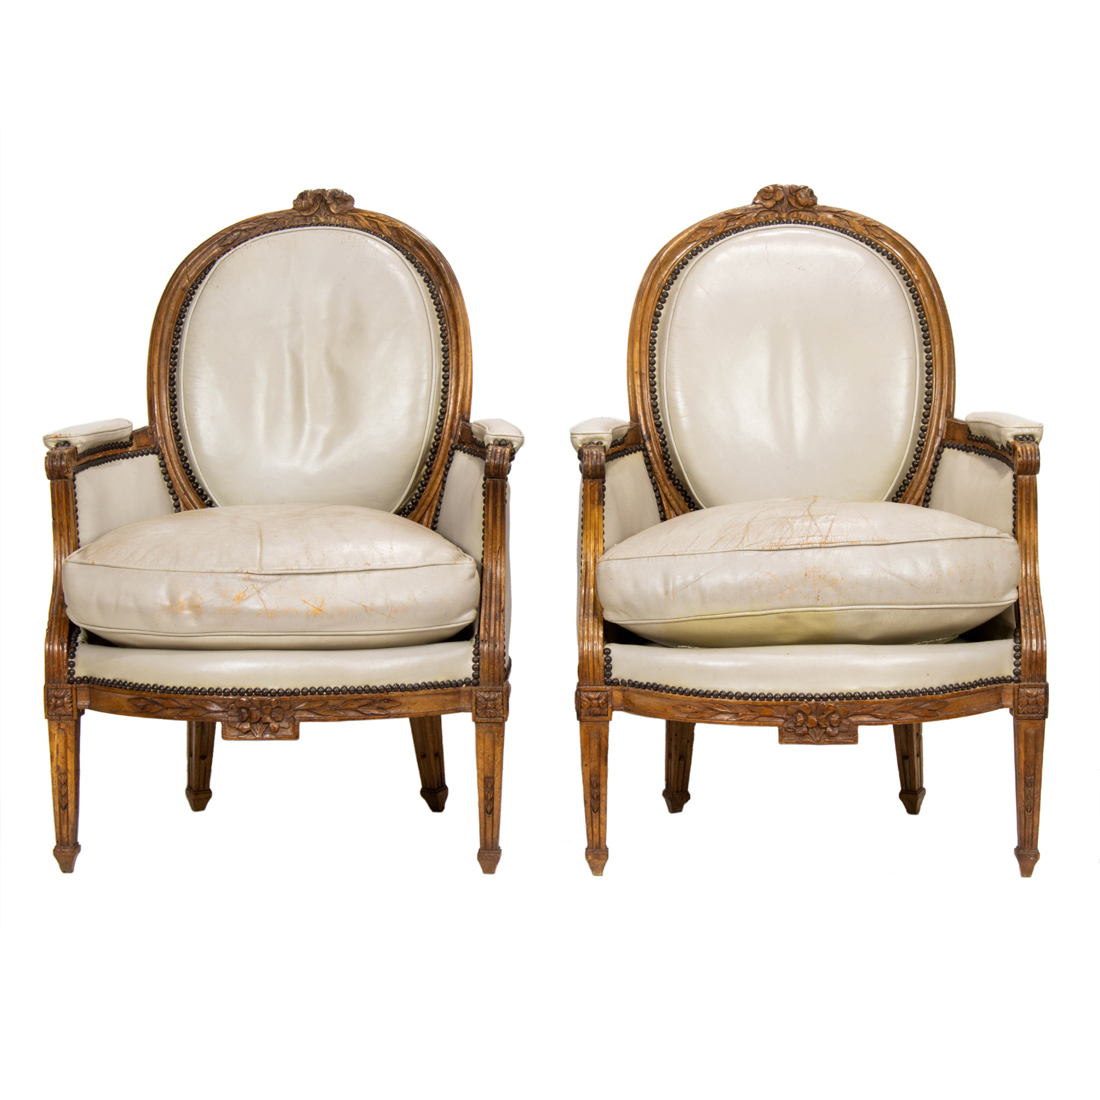 A PAIR OF LOUIS XVI STYLE BERGERES 2d1772